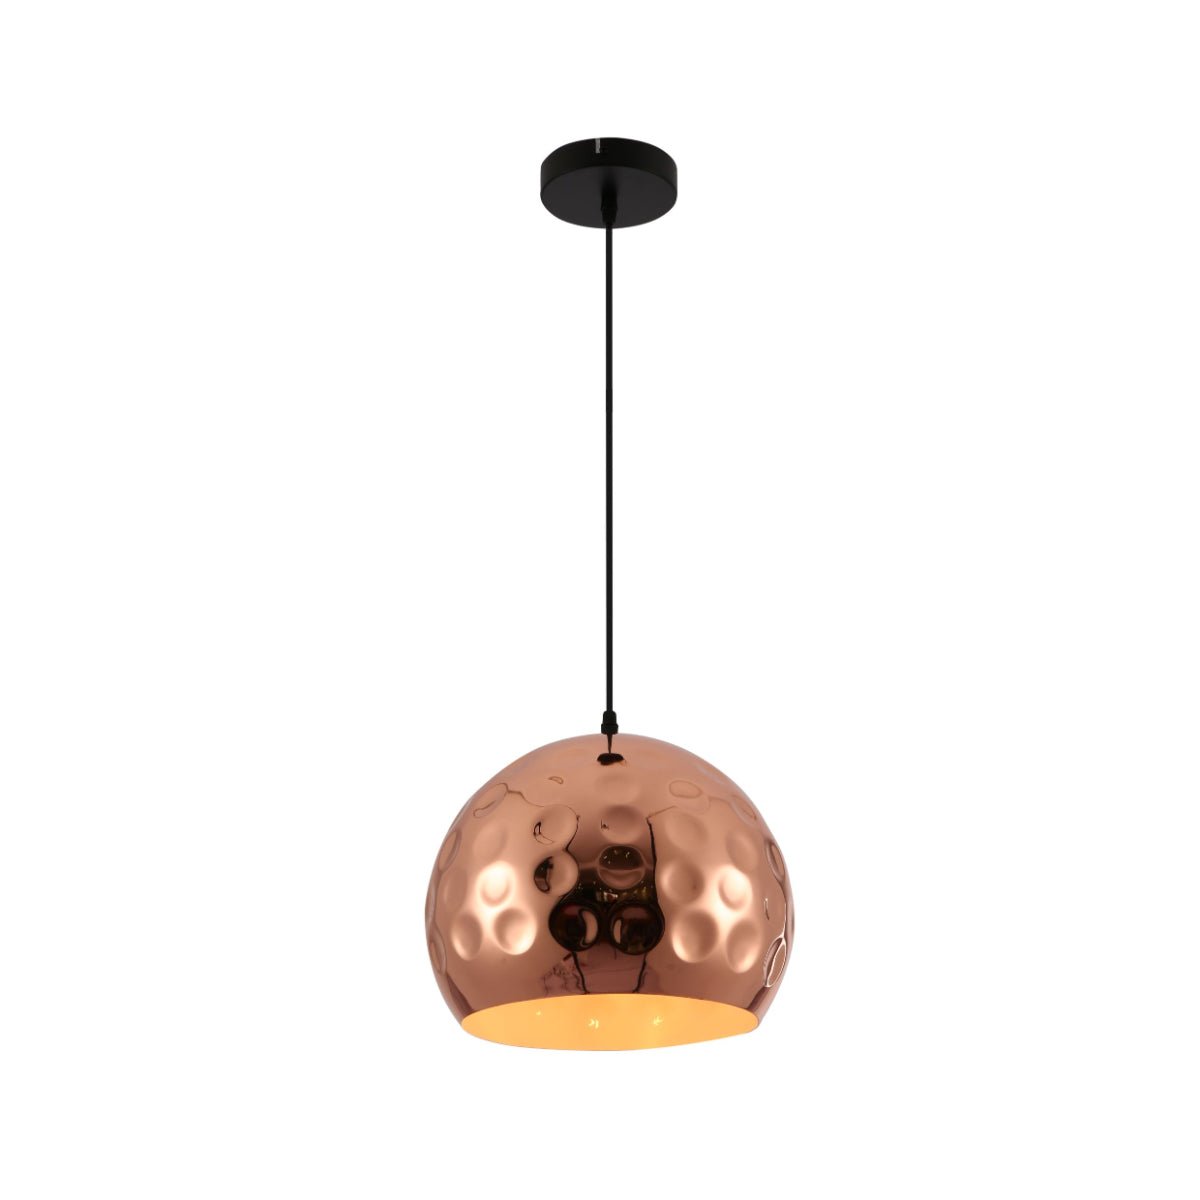 Main image of Copper Metal Golden Hammered Dome Pendant Ceiling Light with E27 | TEKLED 150-17810